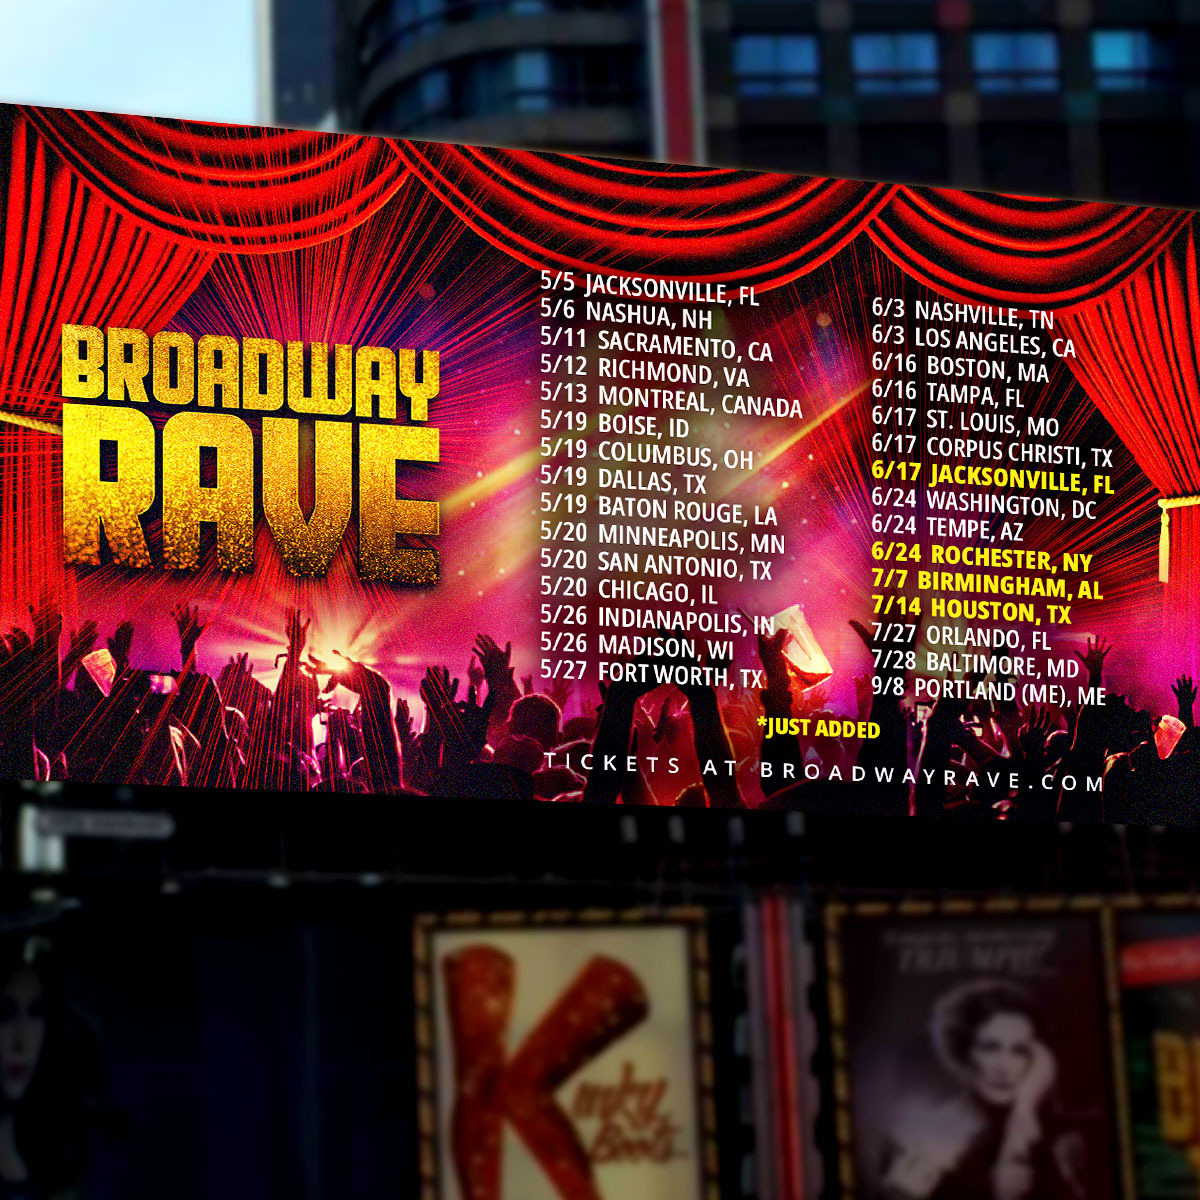 ATTN: Theatre kids‼️ Coming soon to a city near you! 🎟️ BroadwayRave.com